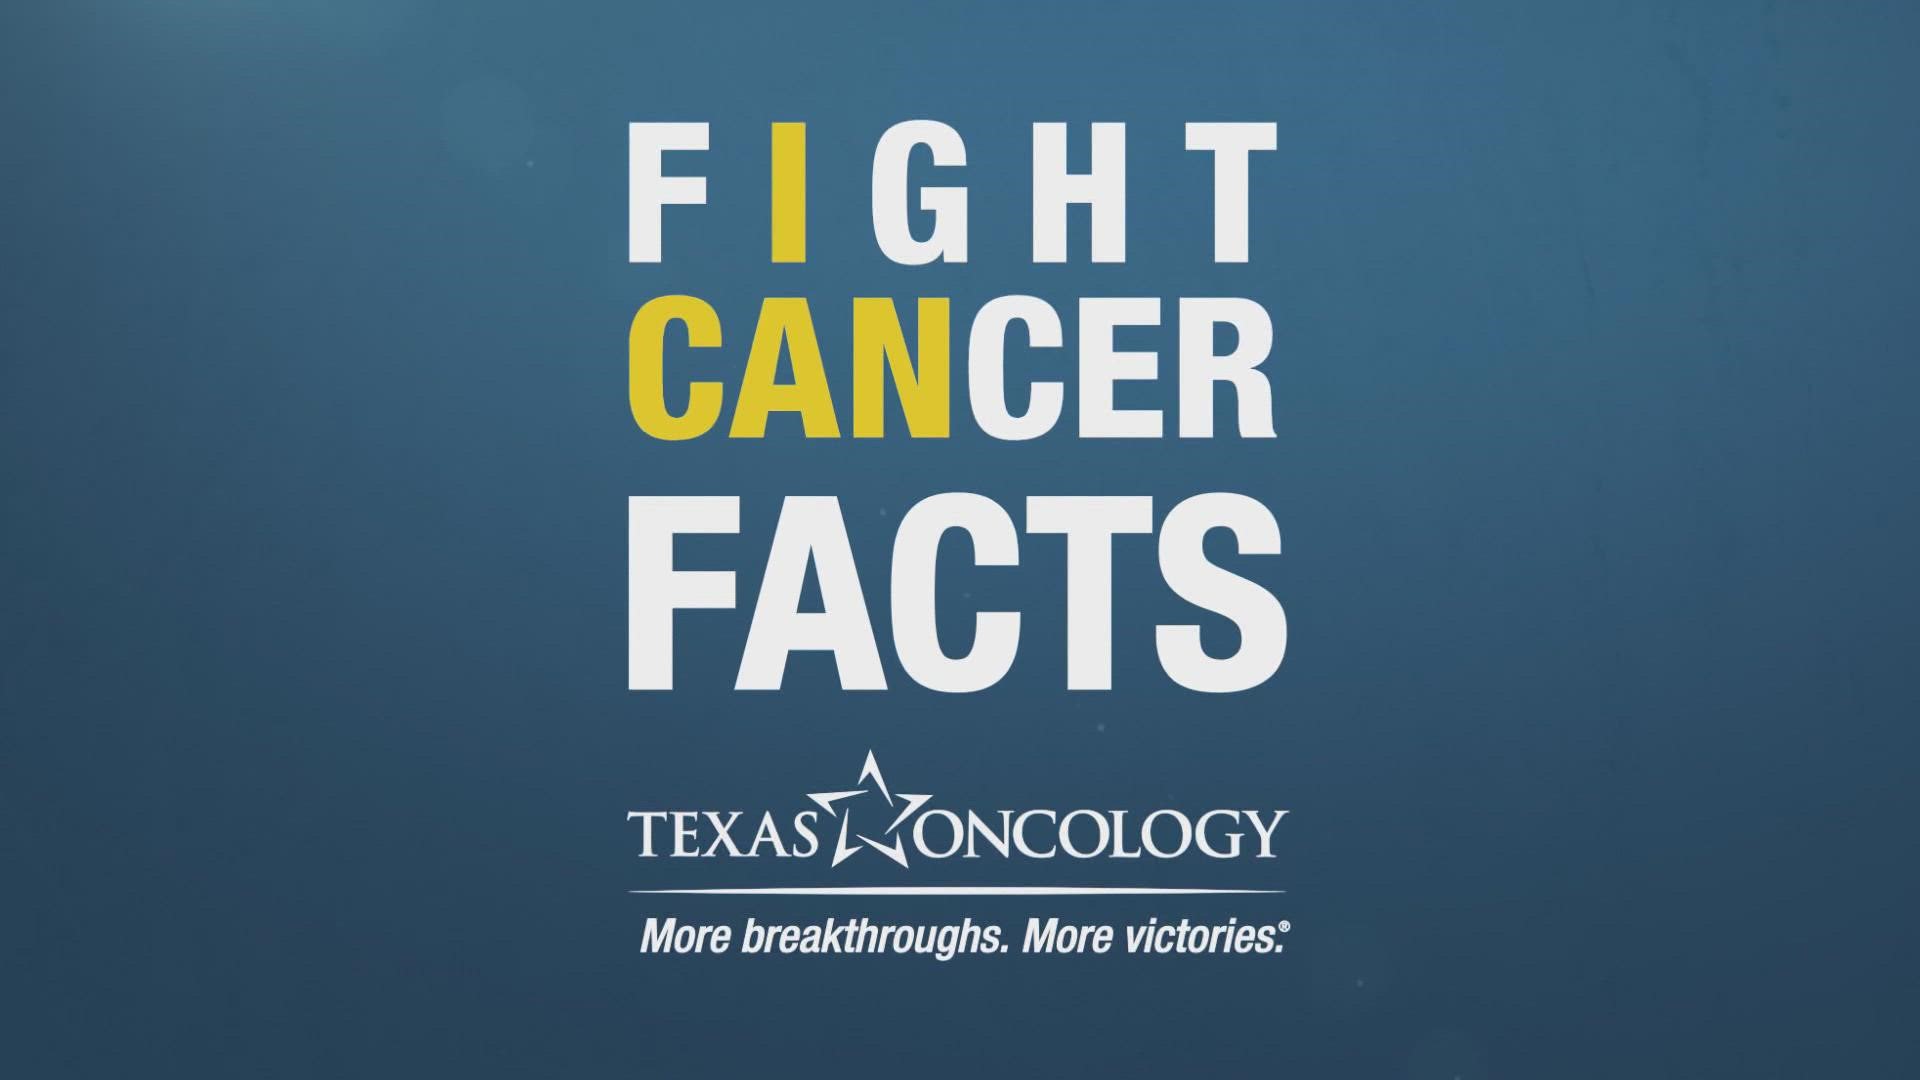 Local Texas Oncology doctor shares how to lower the risk of prostate cancer in men with early detection before it spreads to achieve a nearly 100% chance of survival